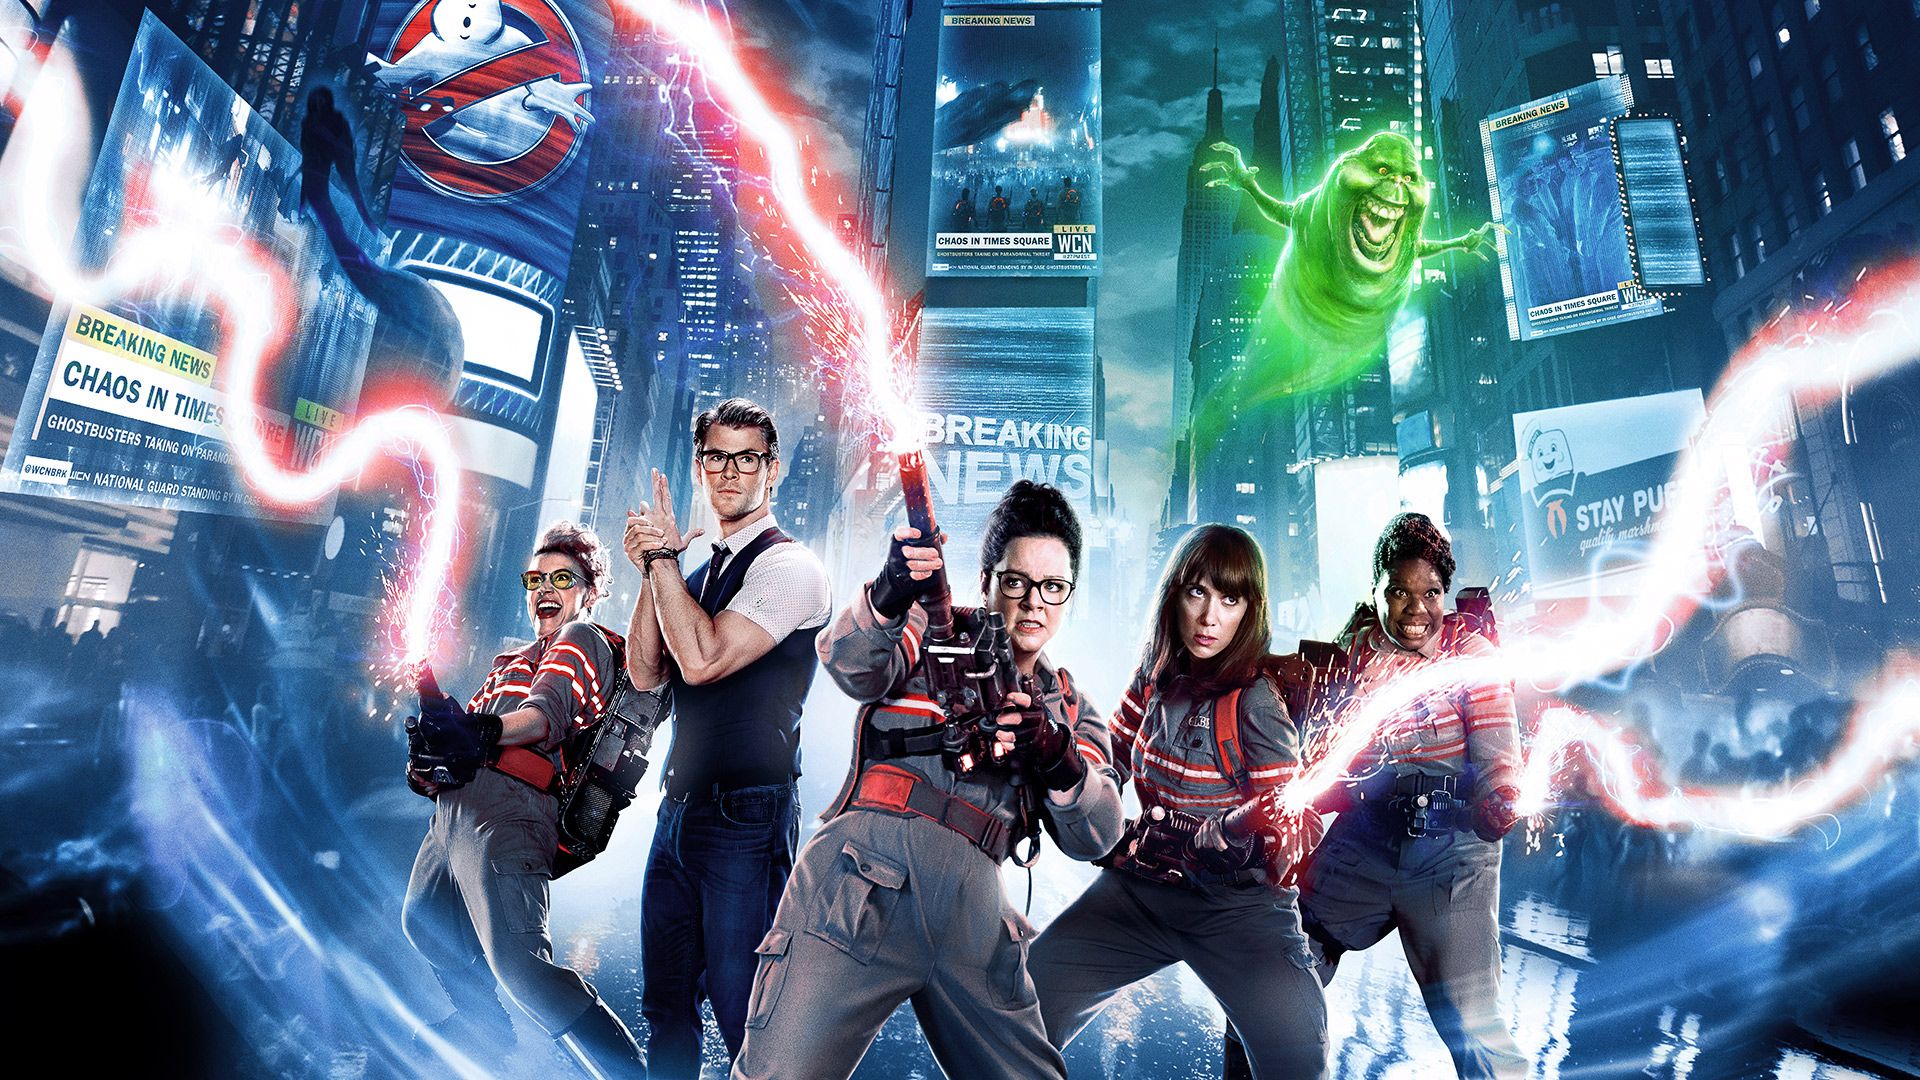 Ghostbusters background